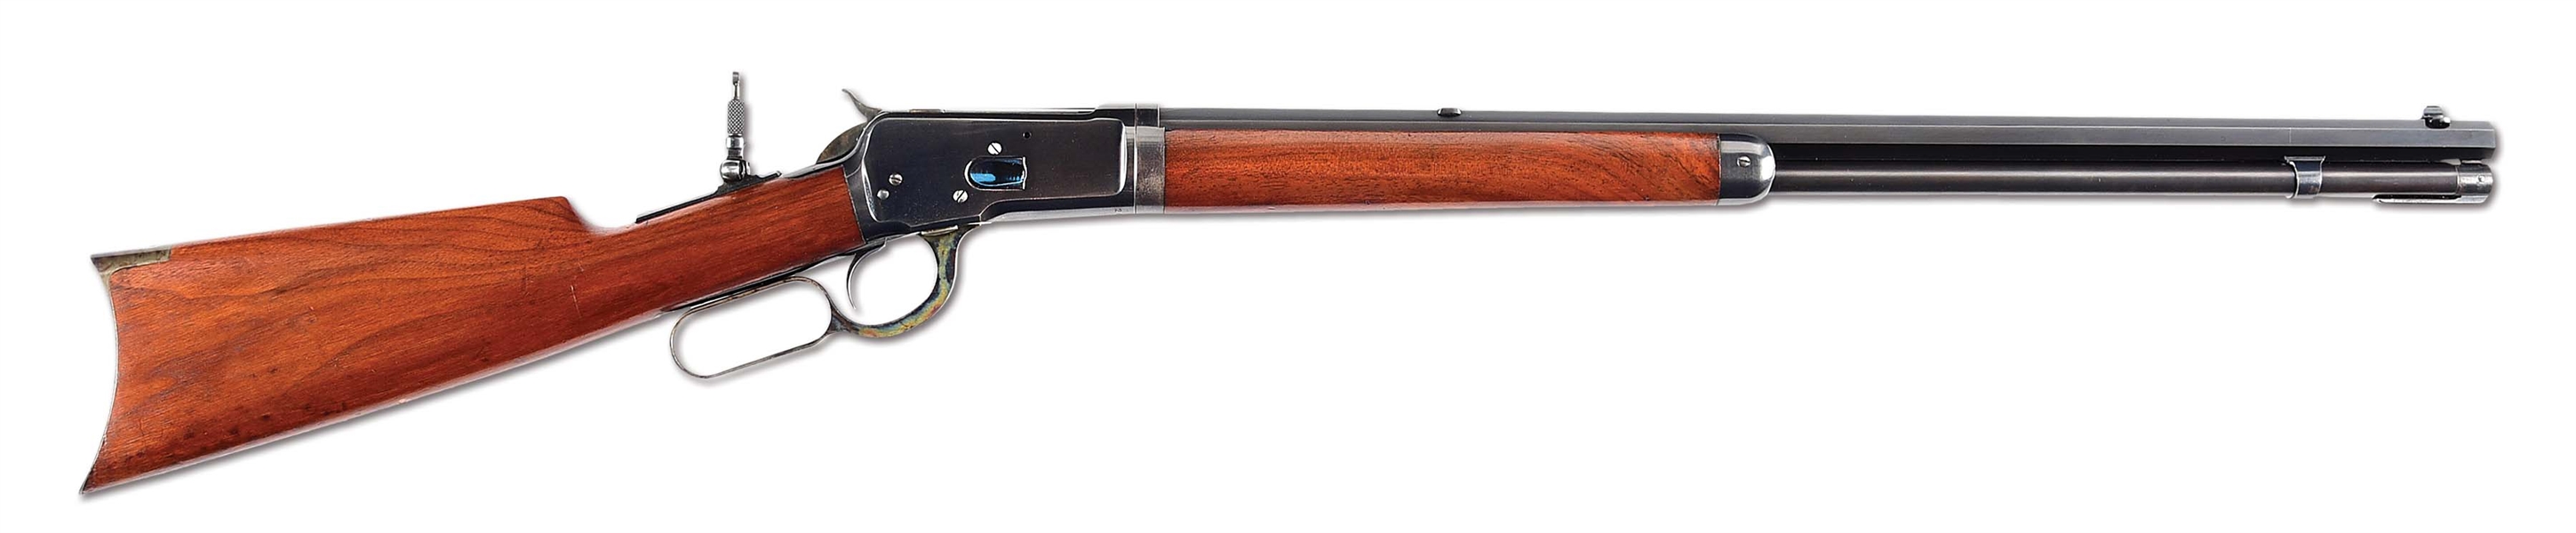 (C) BEST KNOWN BENCHMARK CONDITION WINCHESTER MODEL 1892 TAKEDOWN LEVER ACTION RIFLE IN .44-40.